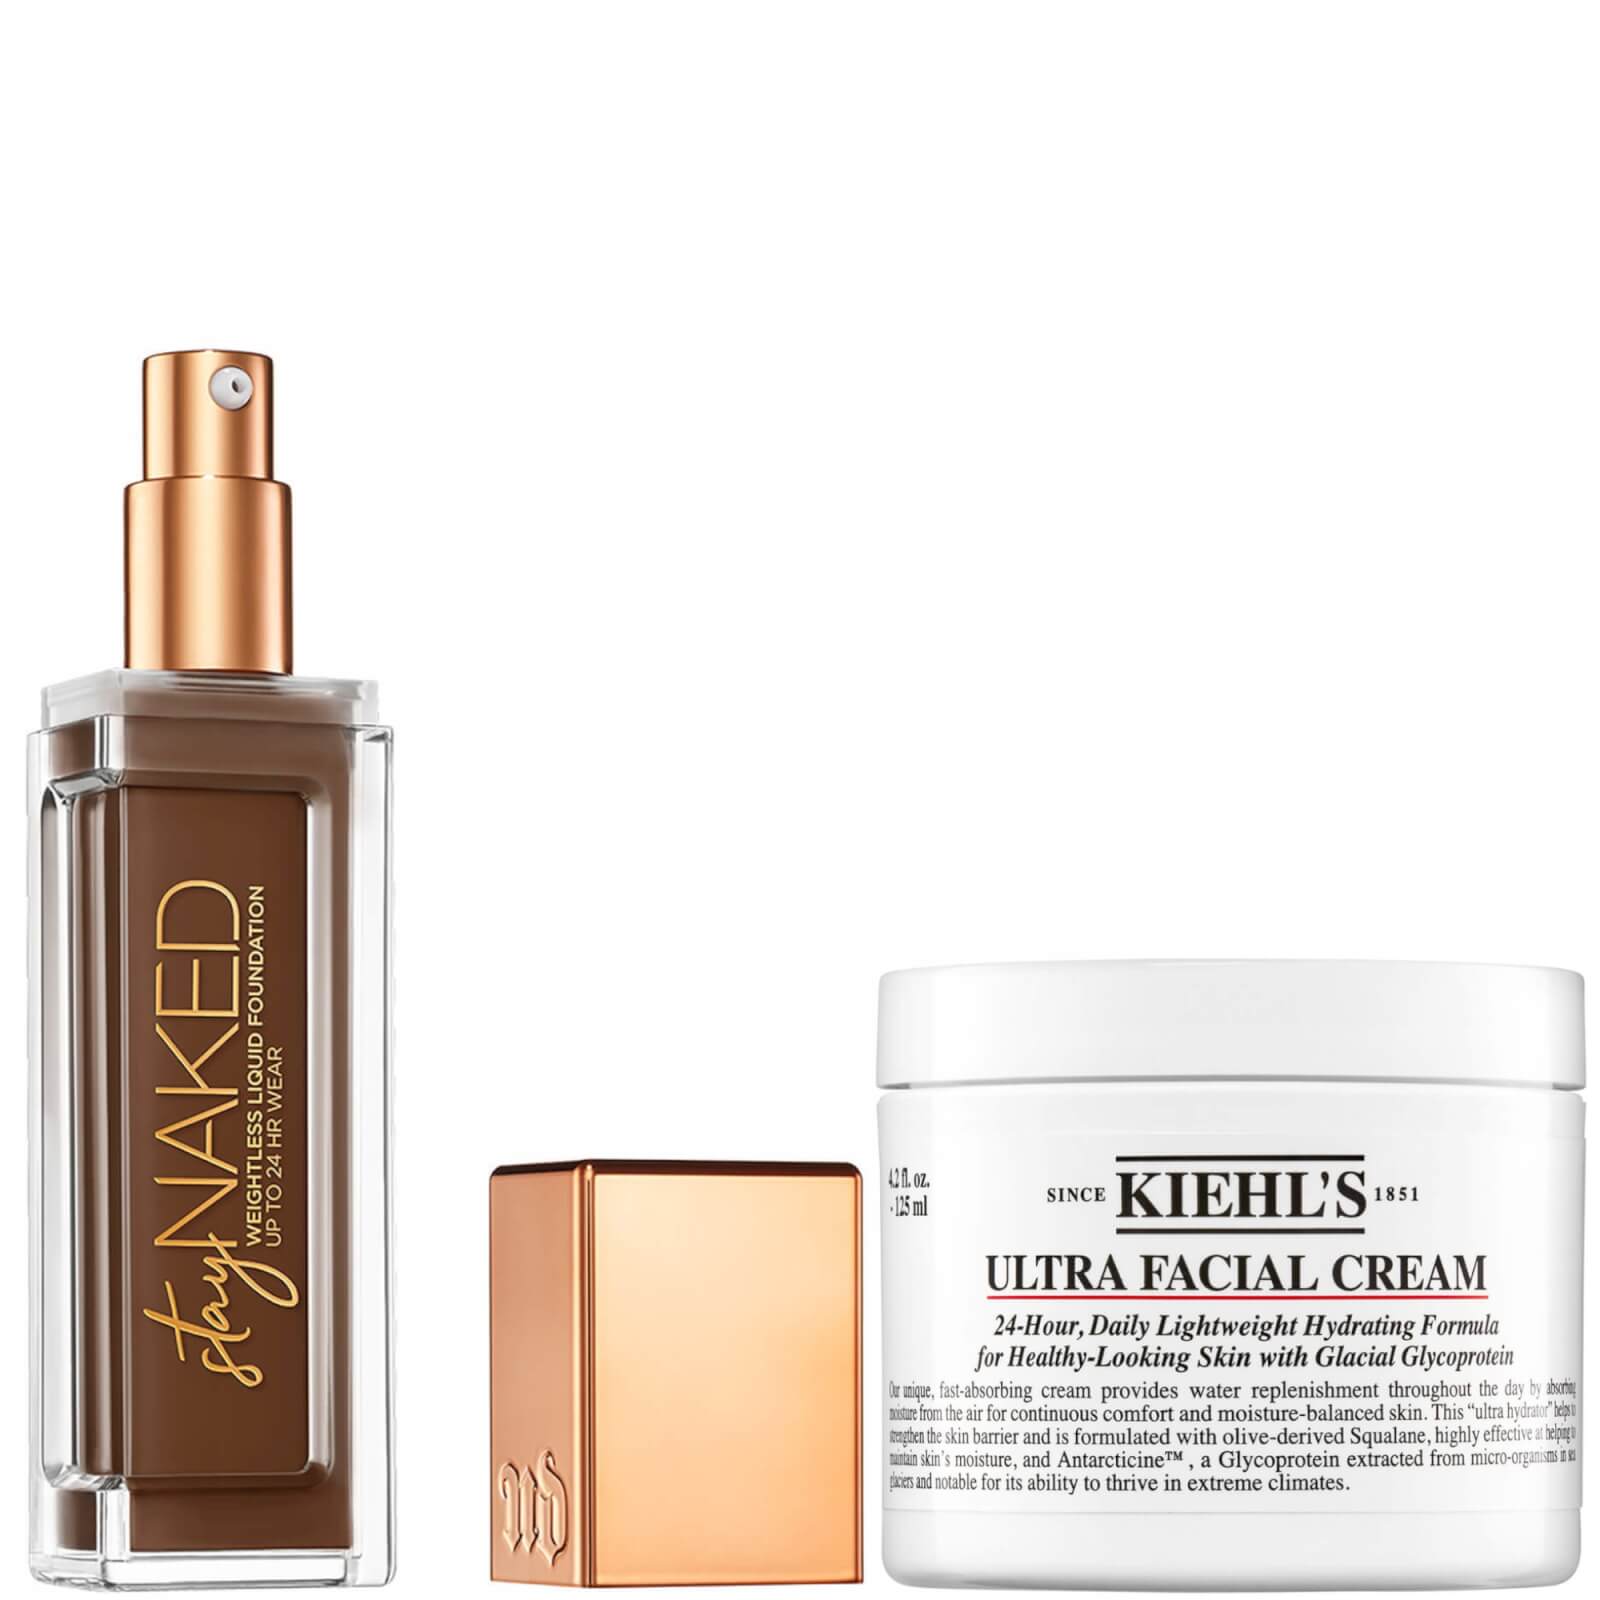 Urban Decay Stay Naked Foundation x Kiehl's Ultra Facial Cream 50ml Bundle (Various Shades) - 81WY